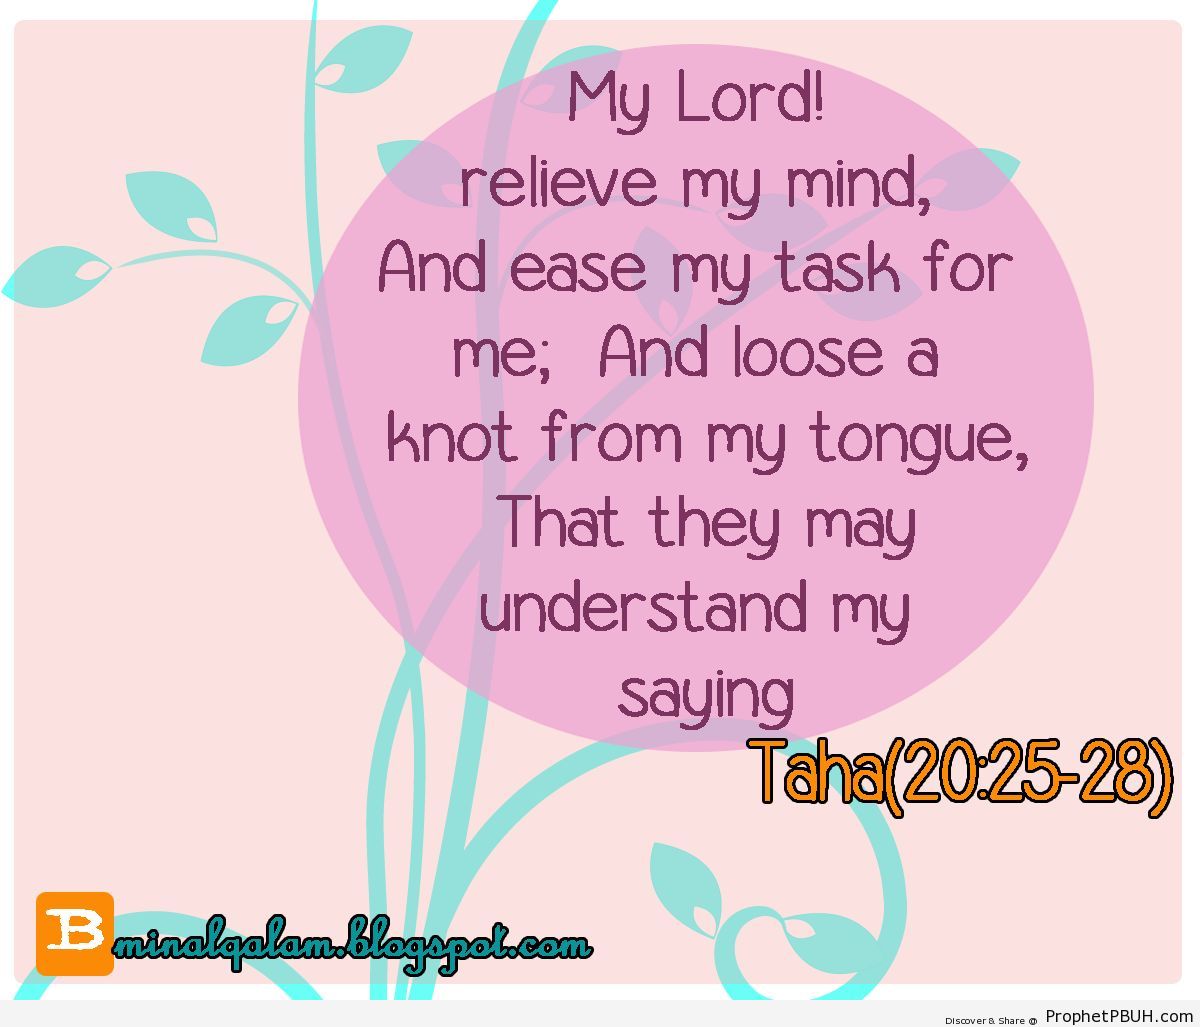 My Lord! relieve my mind (25)And ease my task for... - Islamic Quotes, Hadiths, Duas